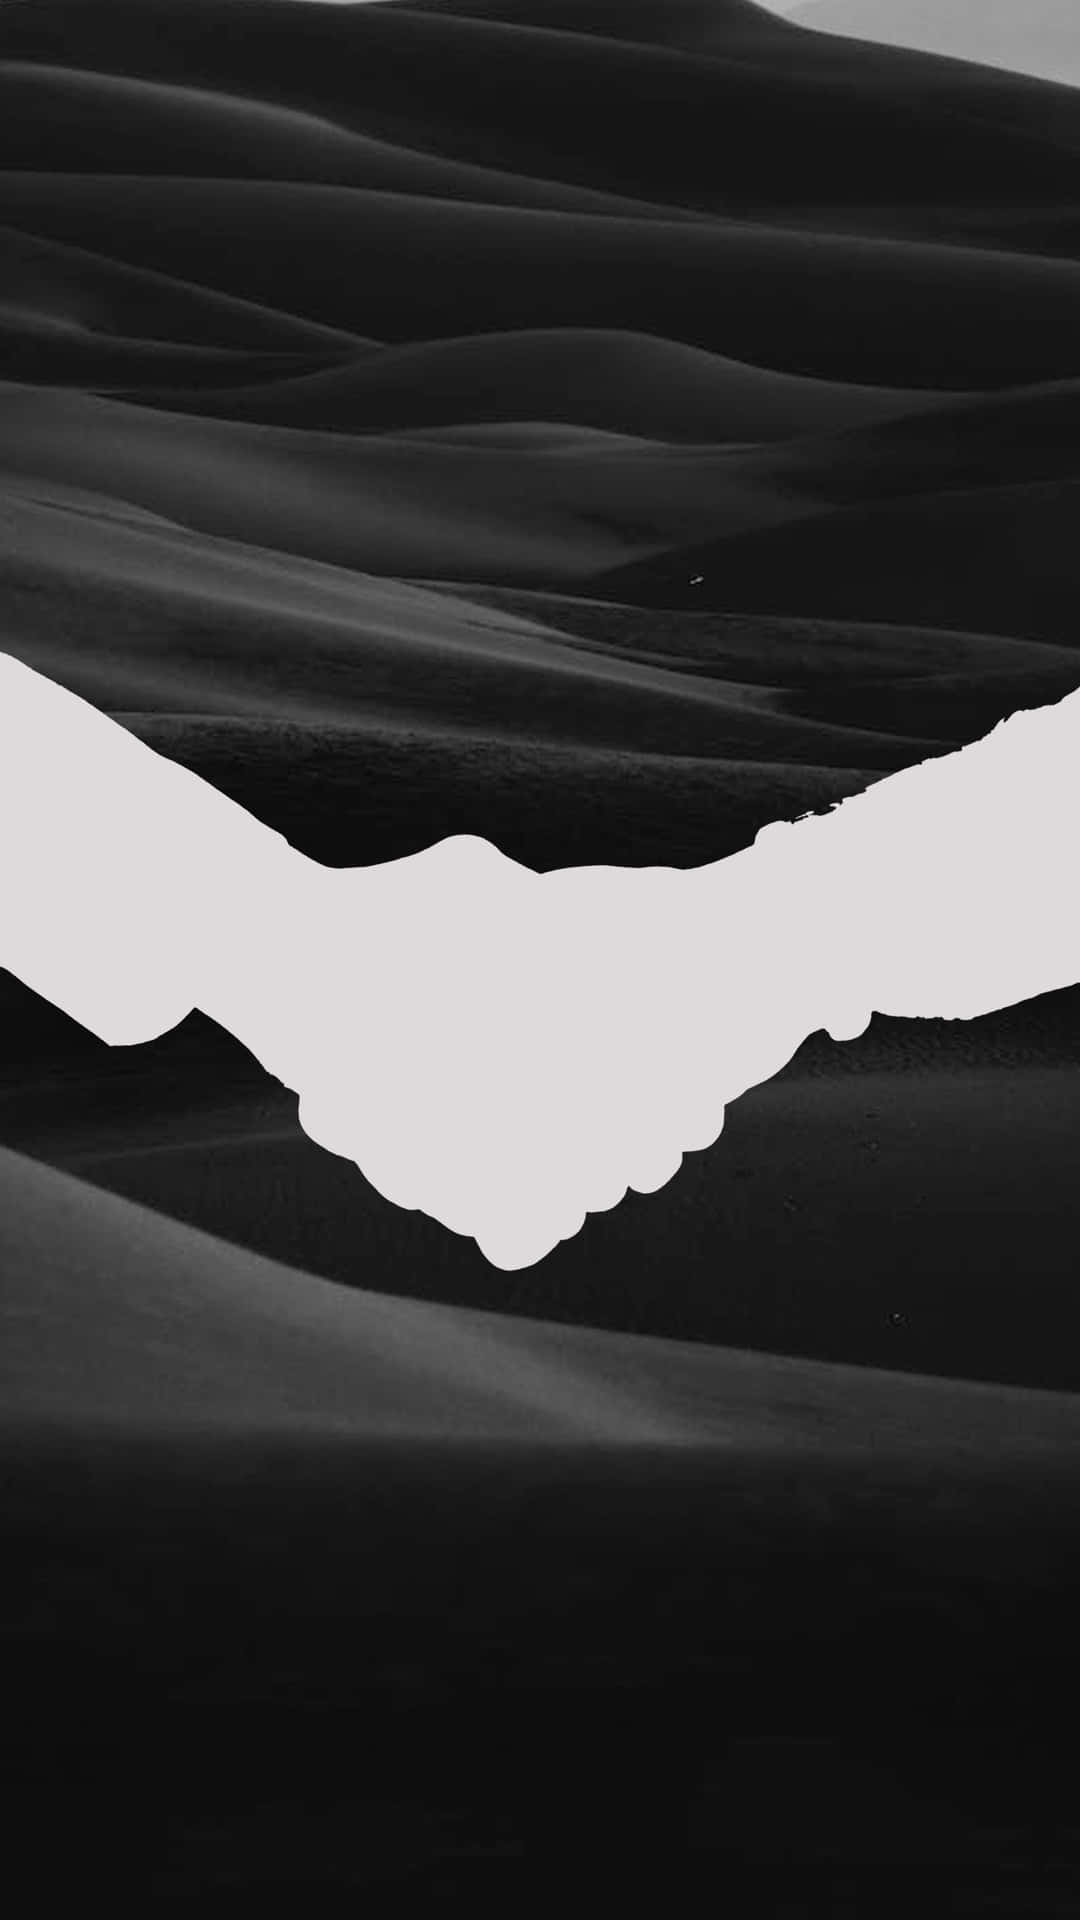 Uniting in Trust - A Black and White Handshake Wallpaper